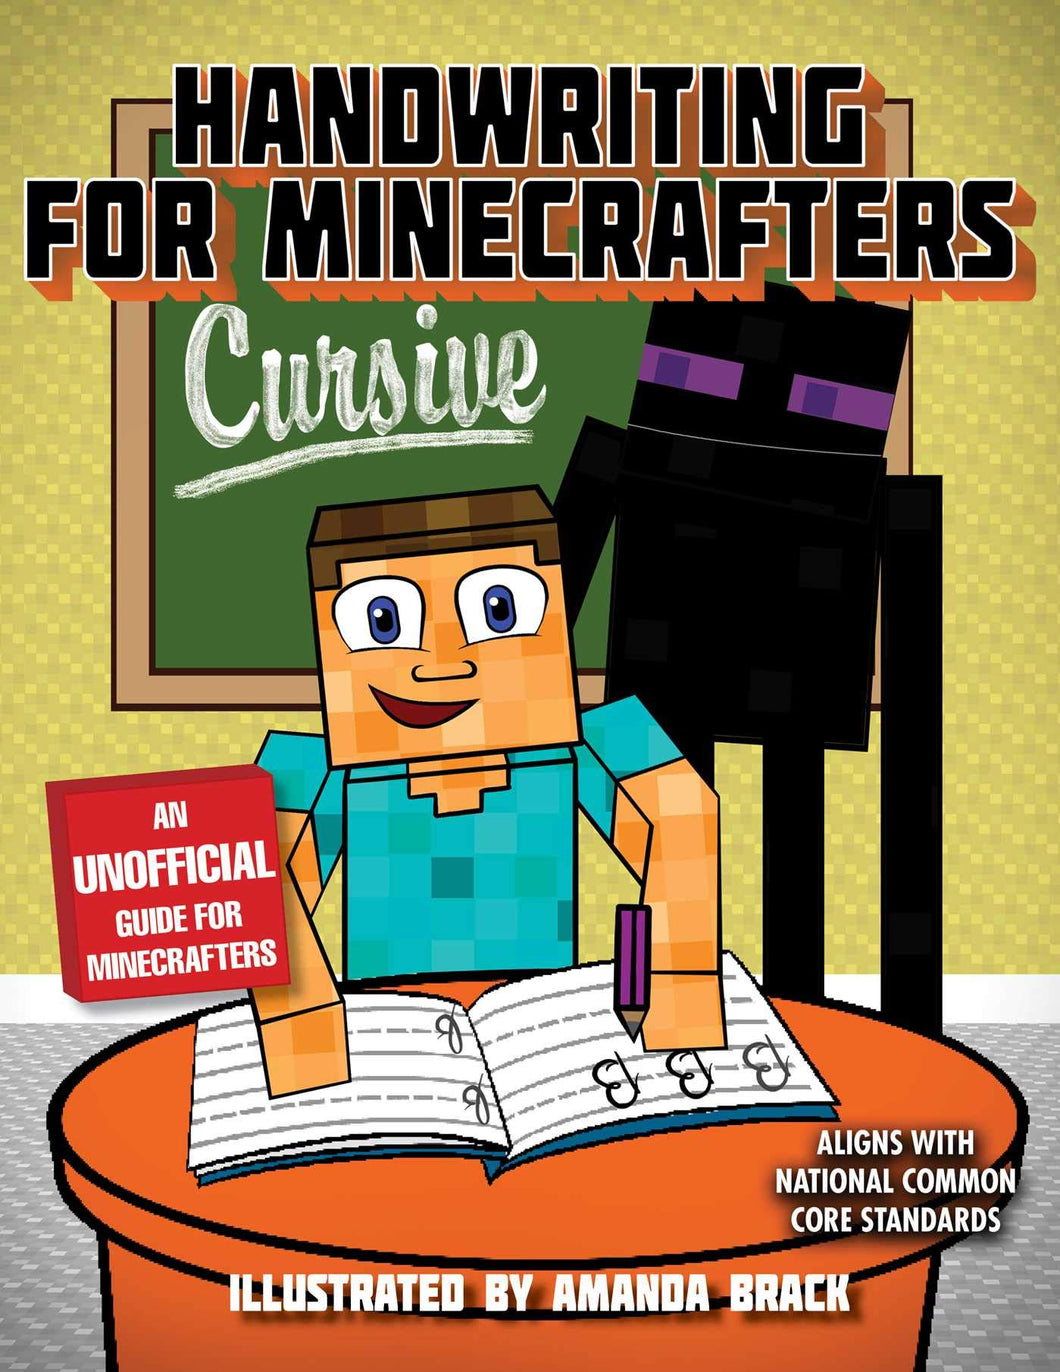 Handwriting for Minecrafters: Cursive